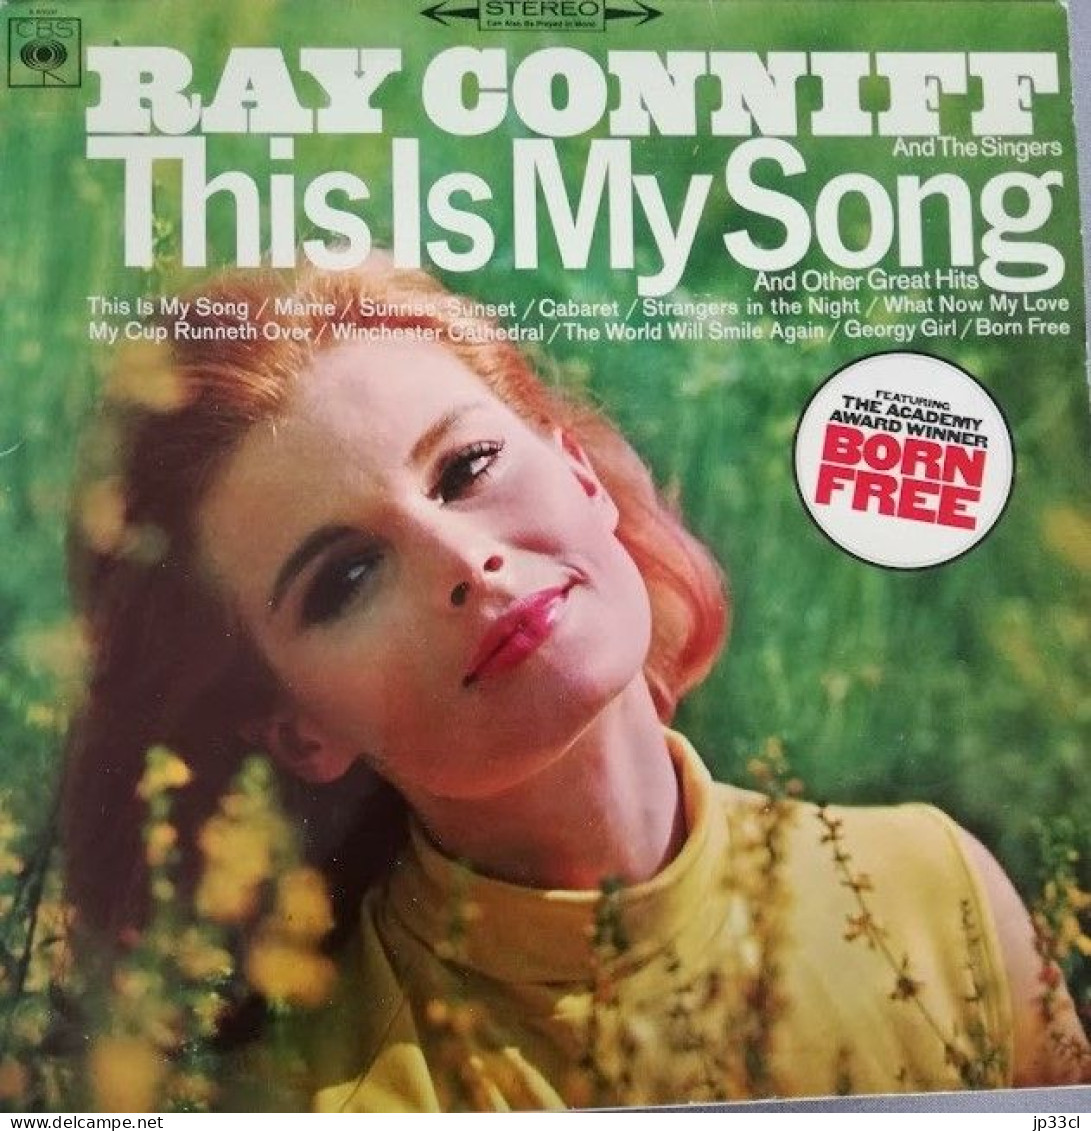 Lot De Treize 33 T De Ray Conniff And His Orchestra And Chorus - Jazz